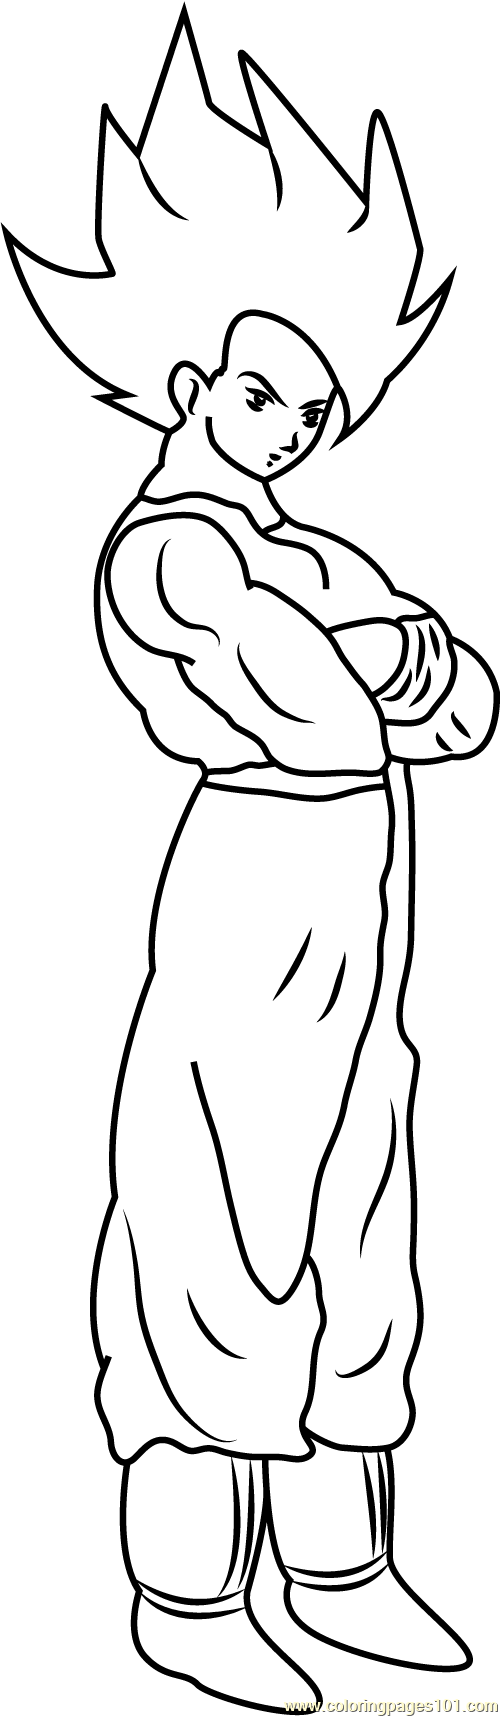 Dragon Ball Z Gogeta Coloring Pages - Free Printable for Kids